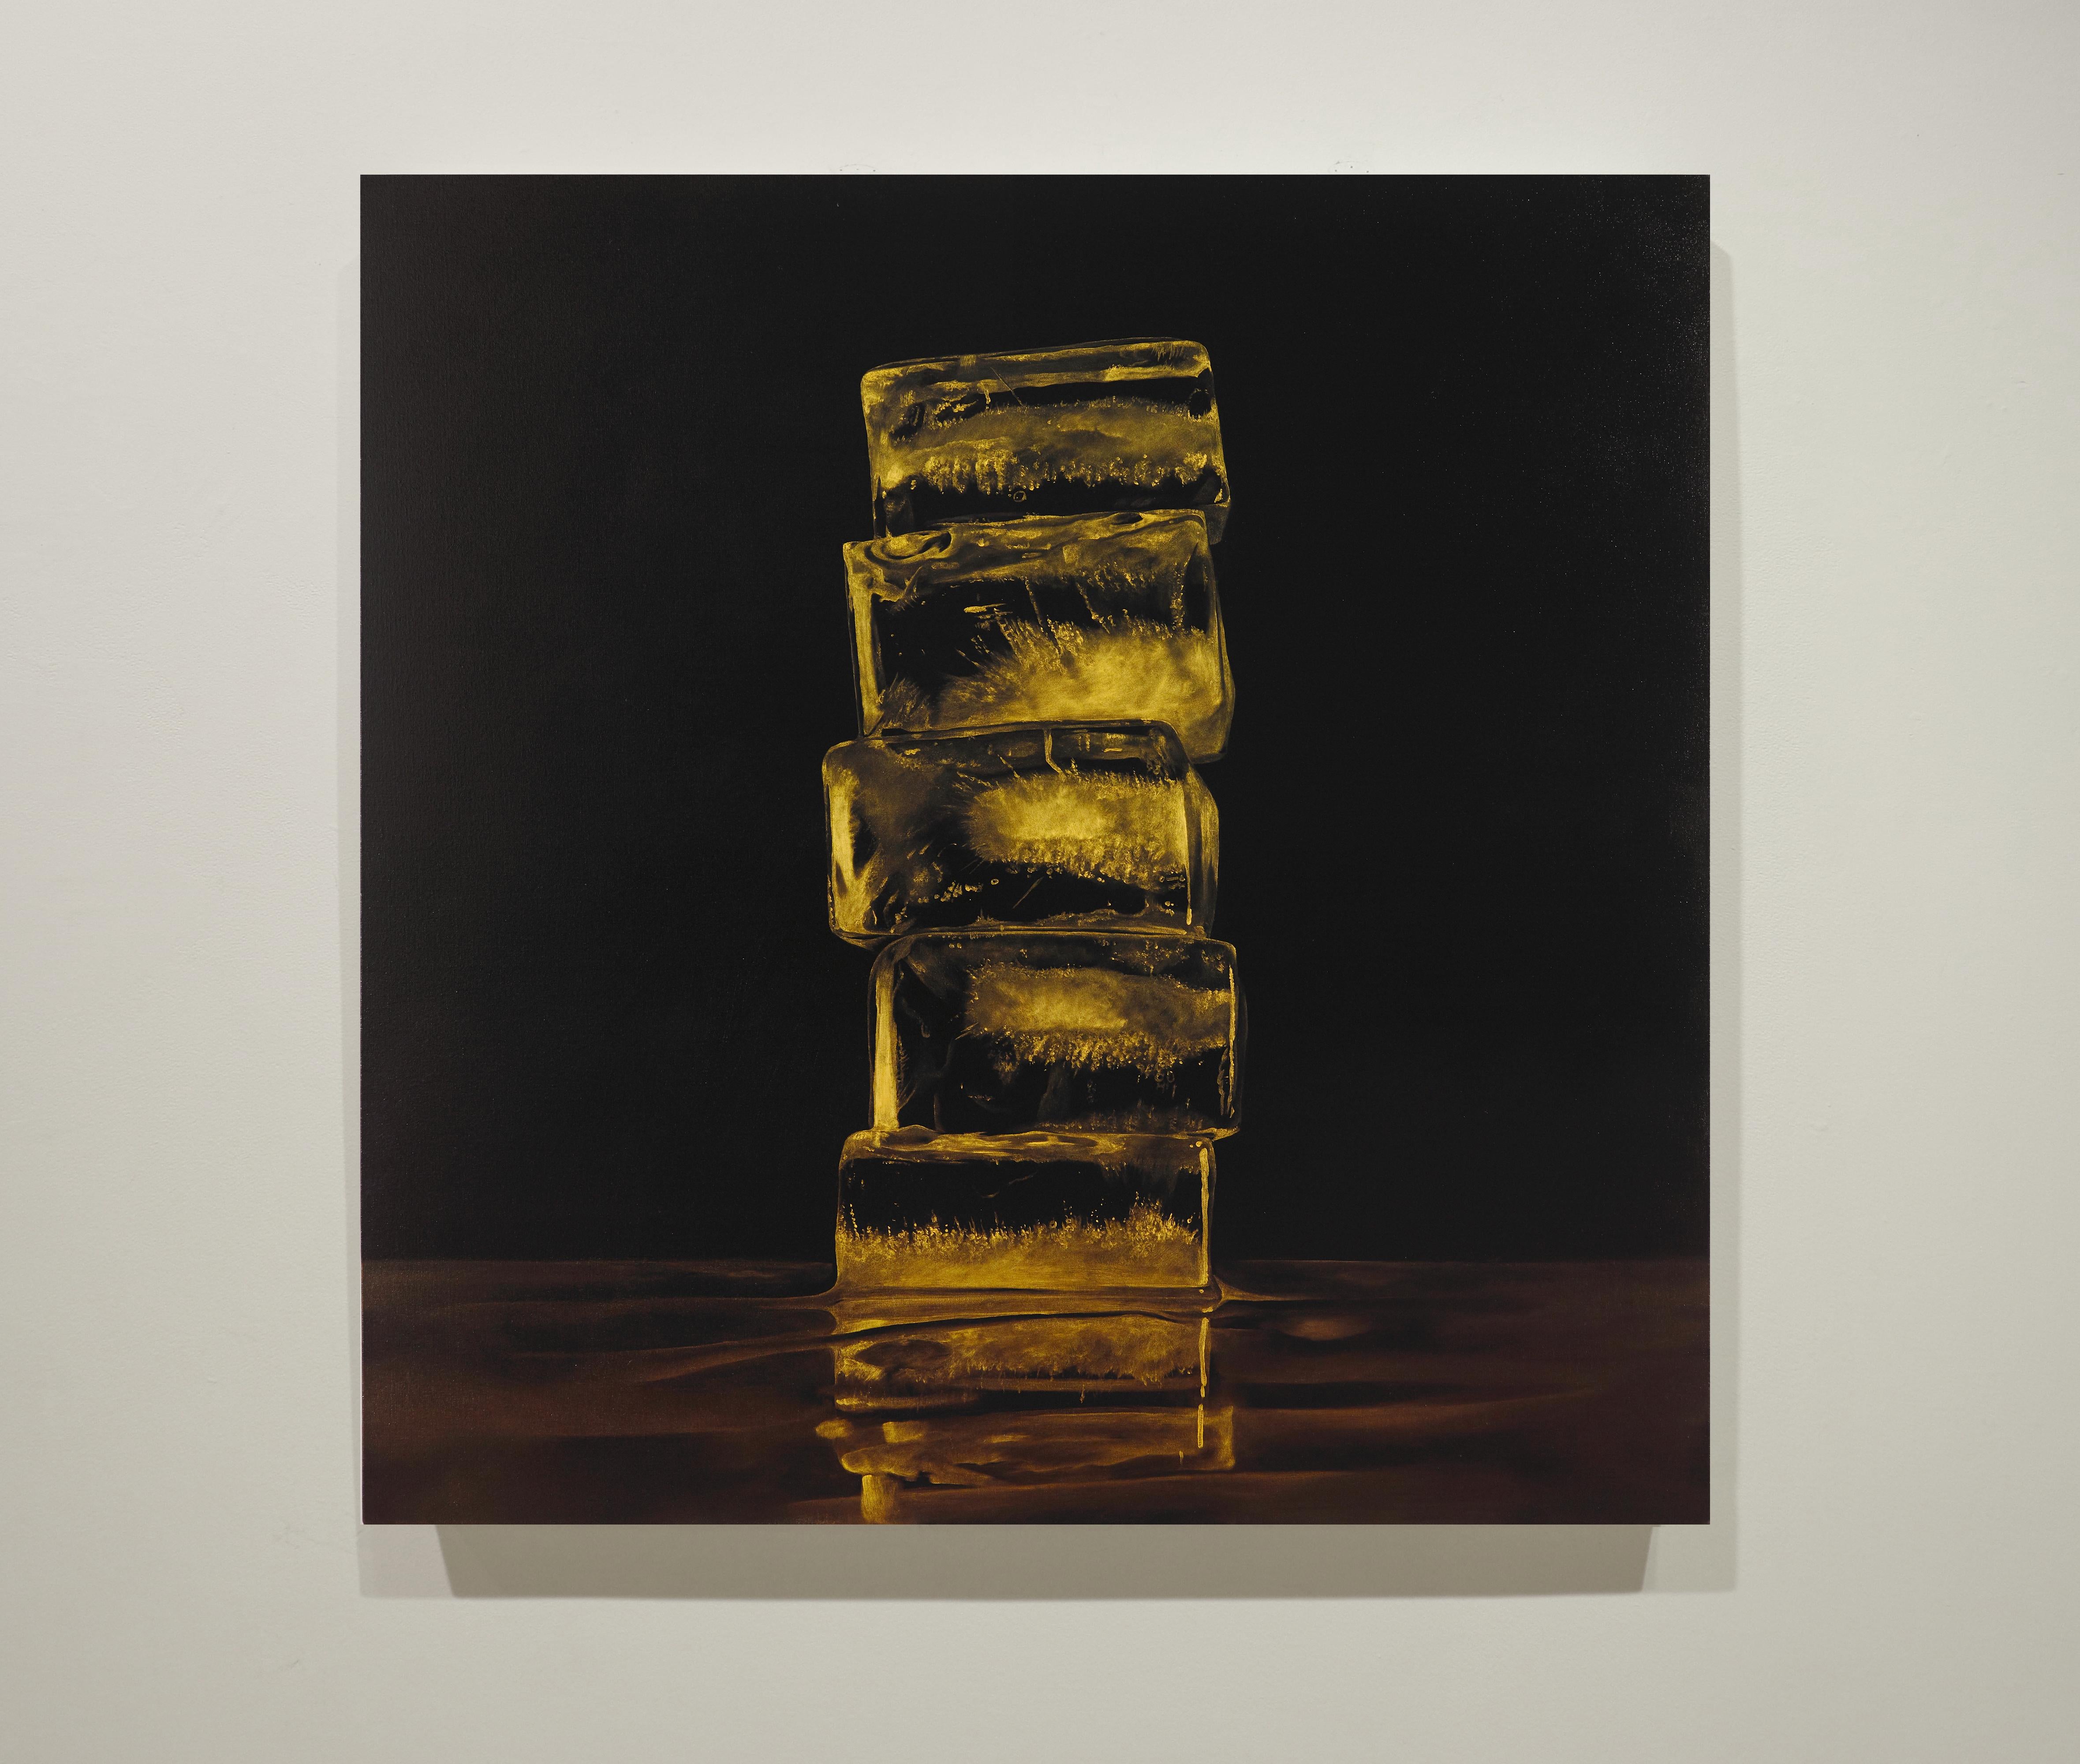 HOW FRAGILE WE ARE GOLD, ice cubes, photo-realism, dark, gold, black, still life - Painting by Kevin Palme